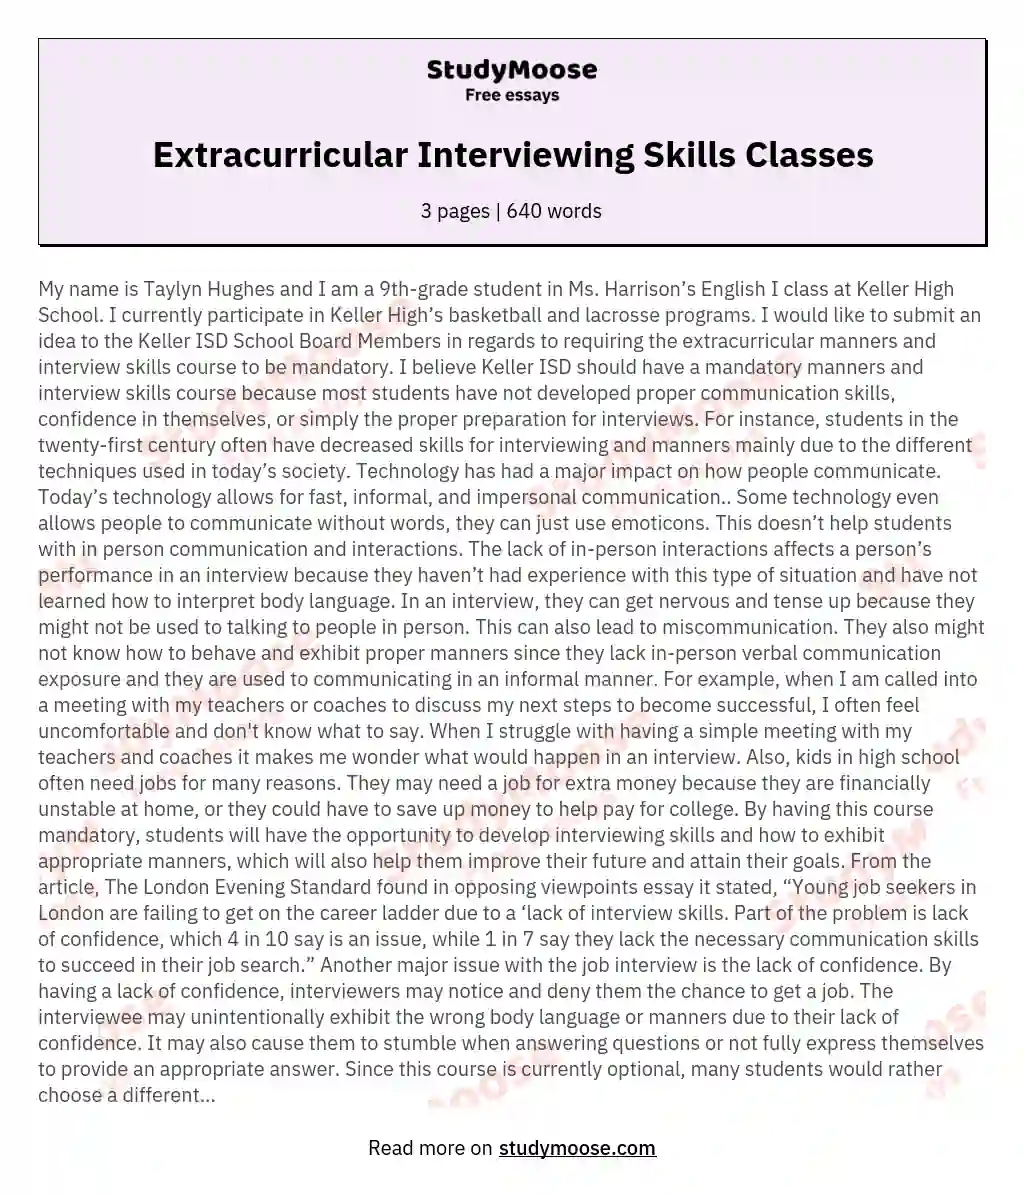 Extracurricular Interviewing Skills Classes essay